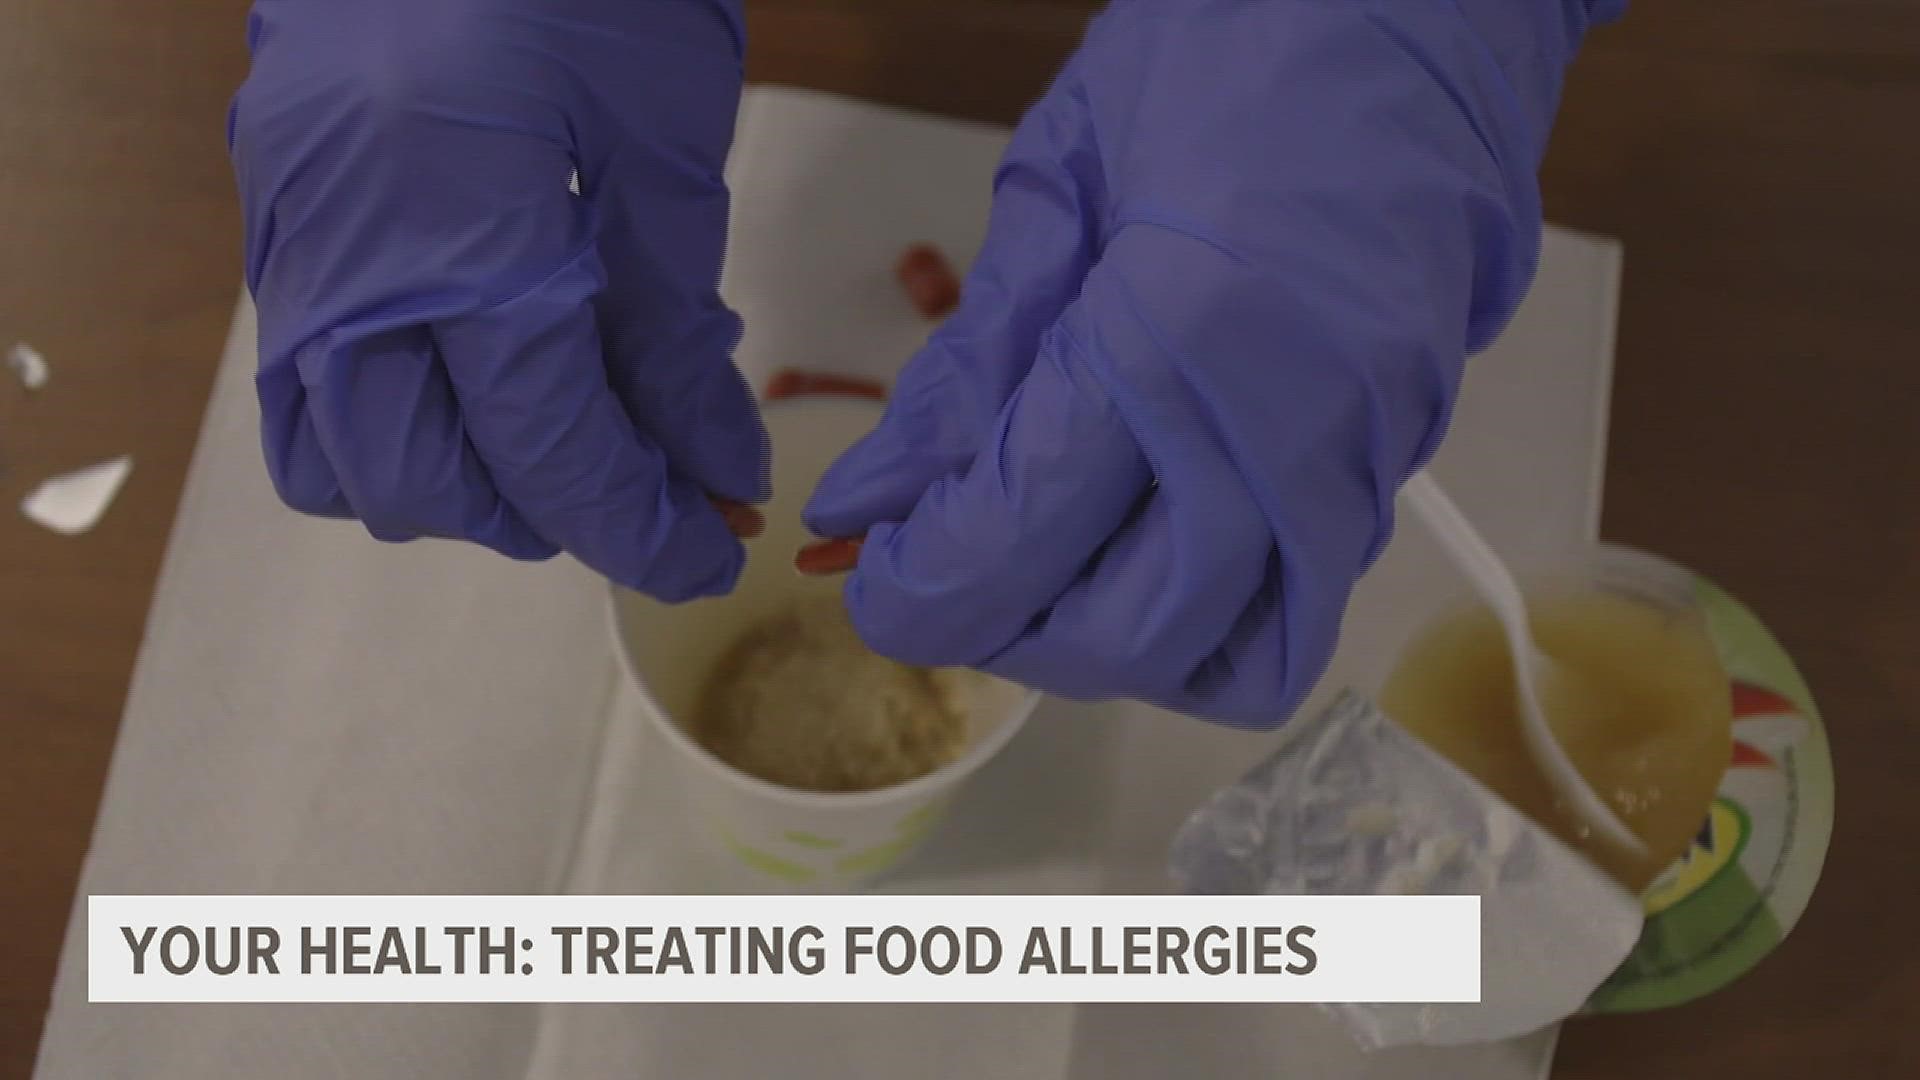 More than 32 million Americans, including kids, have food allergies. Now, new therapies have been approved, but researchers worry many people aren't aware.